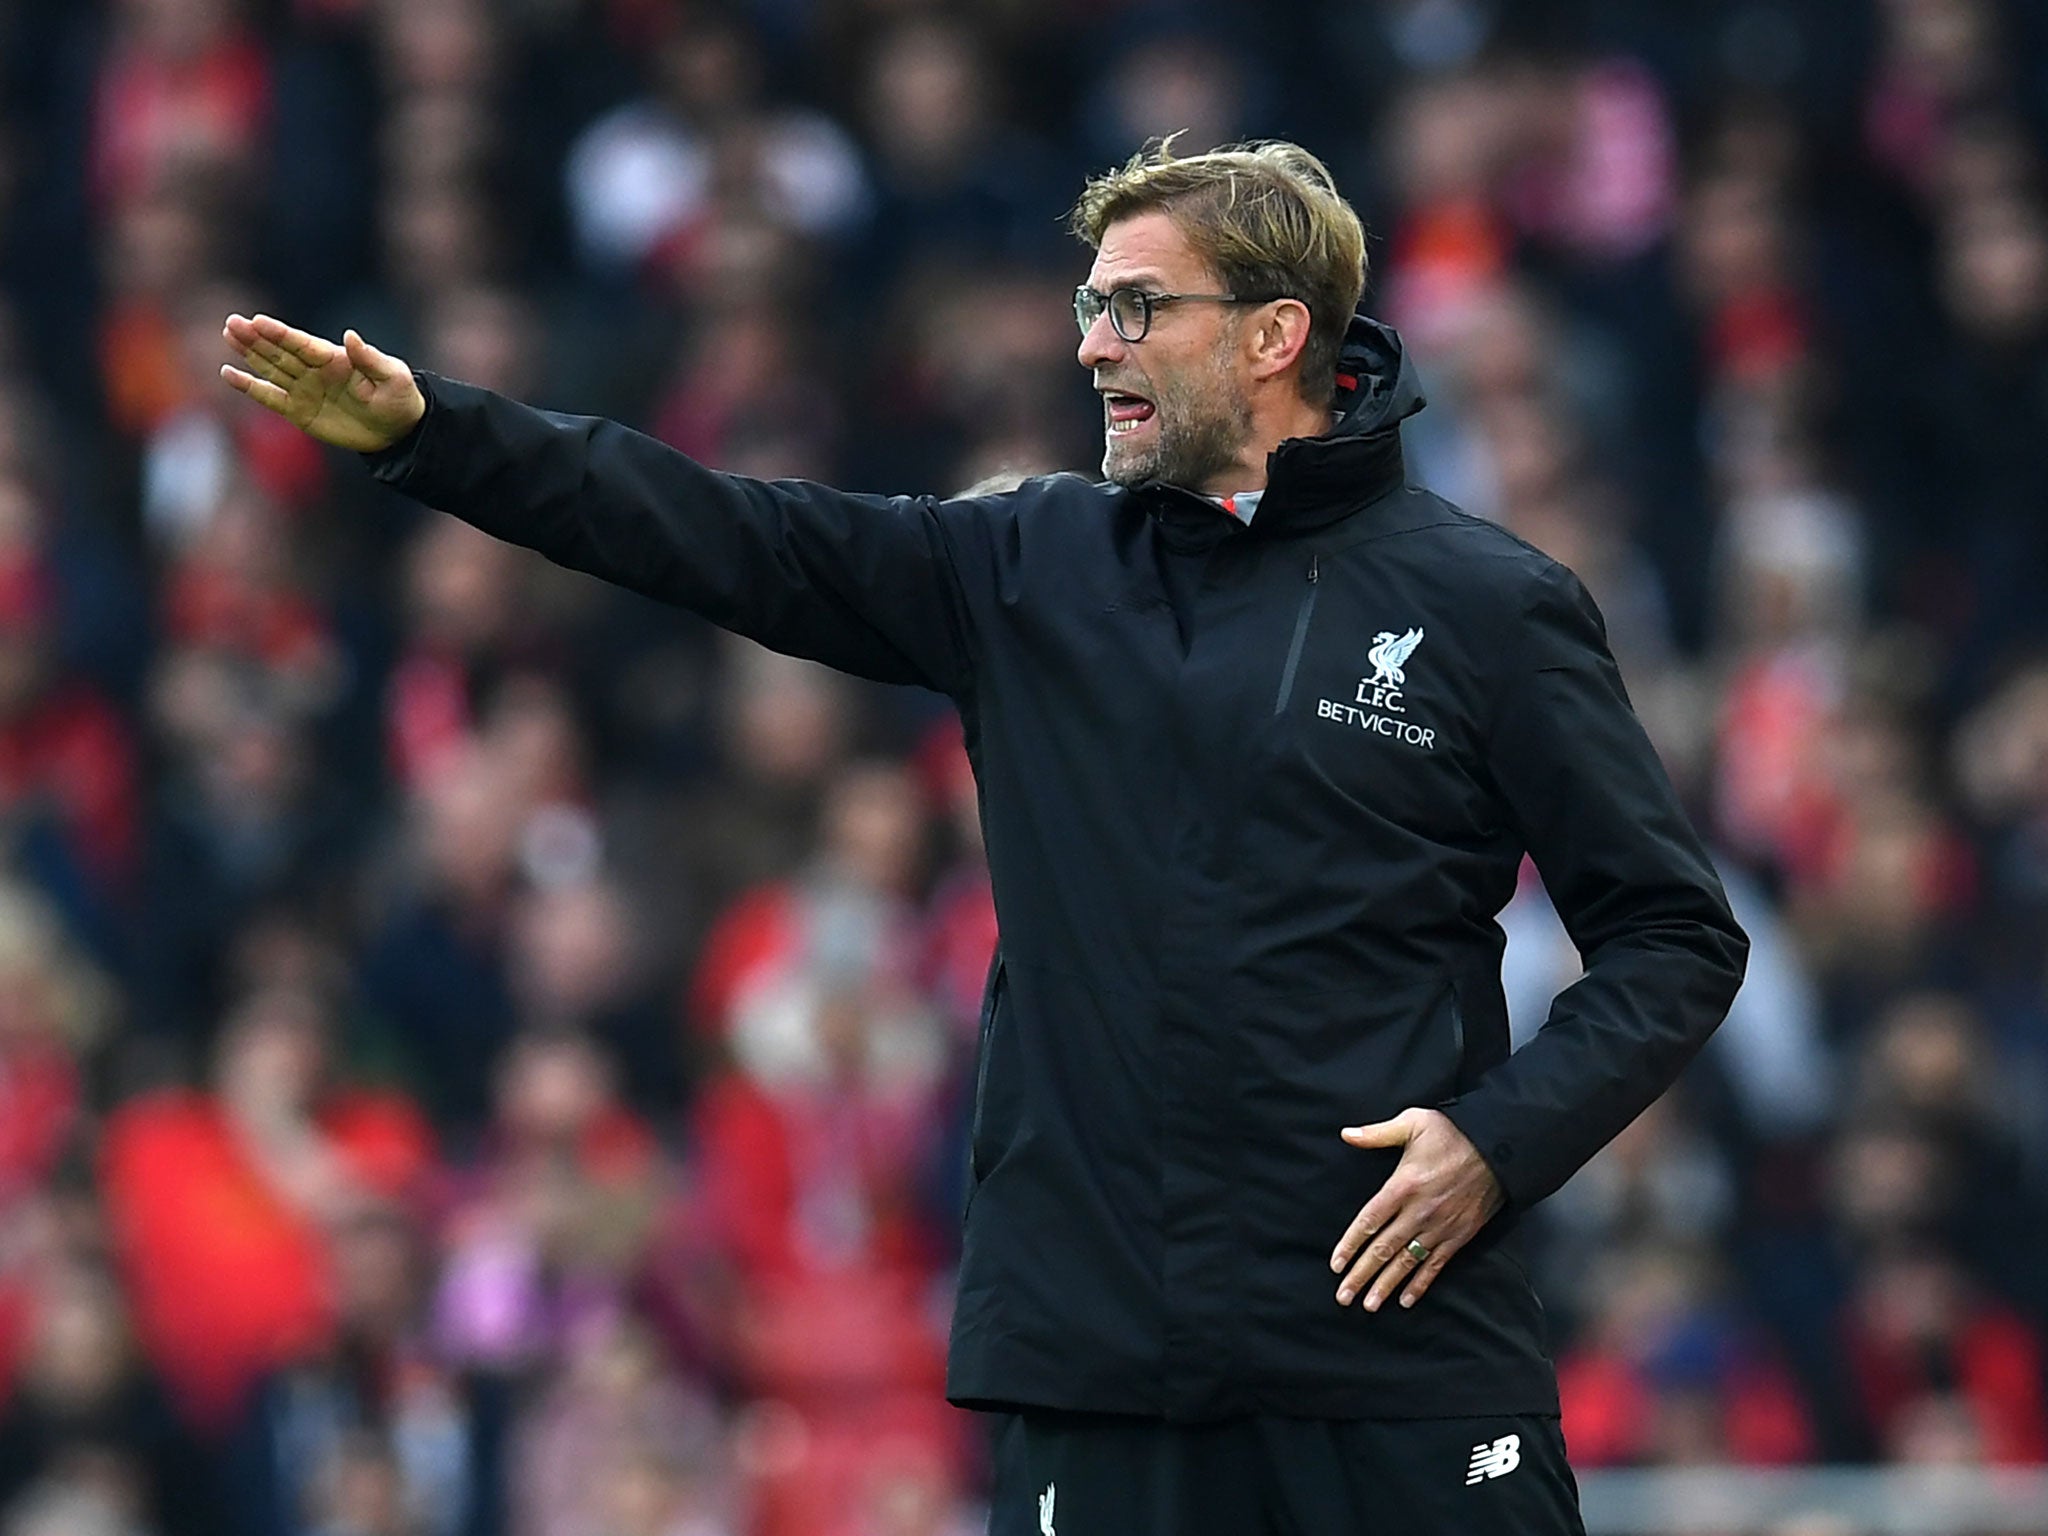 Jürgen Klopp believes he did not make a mistake in selecting Liverpool's youngest ever line-up on Sunday